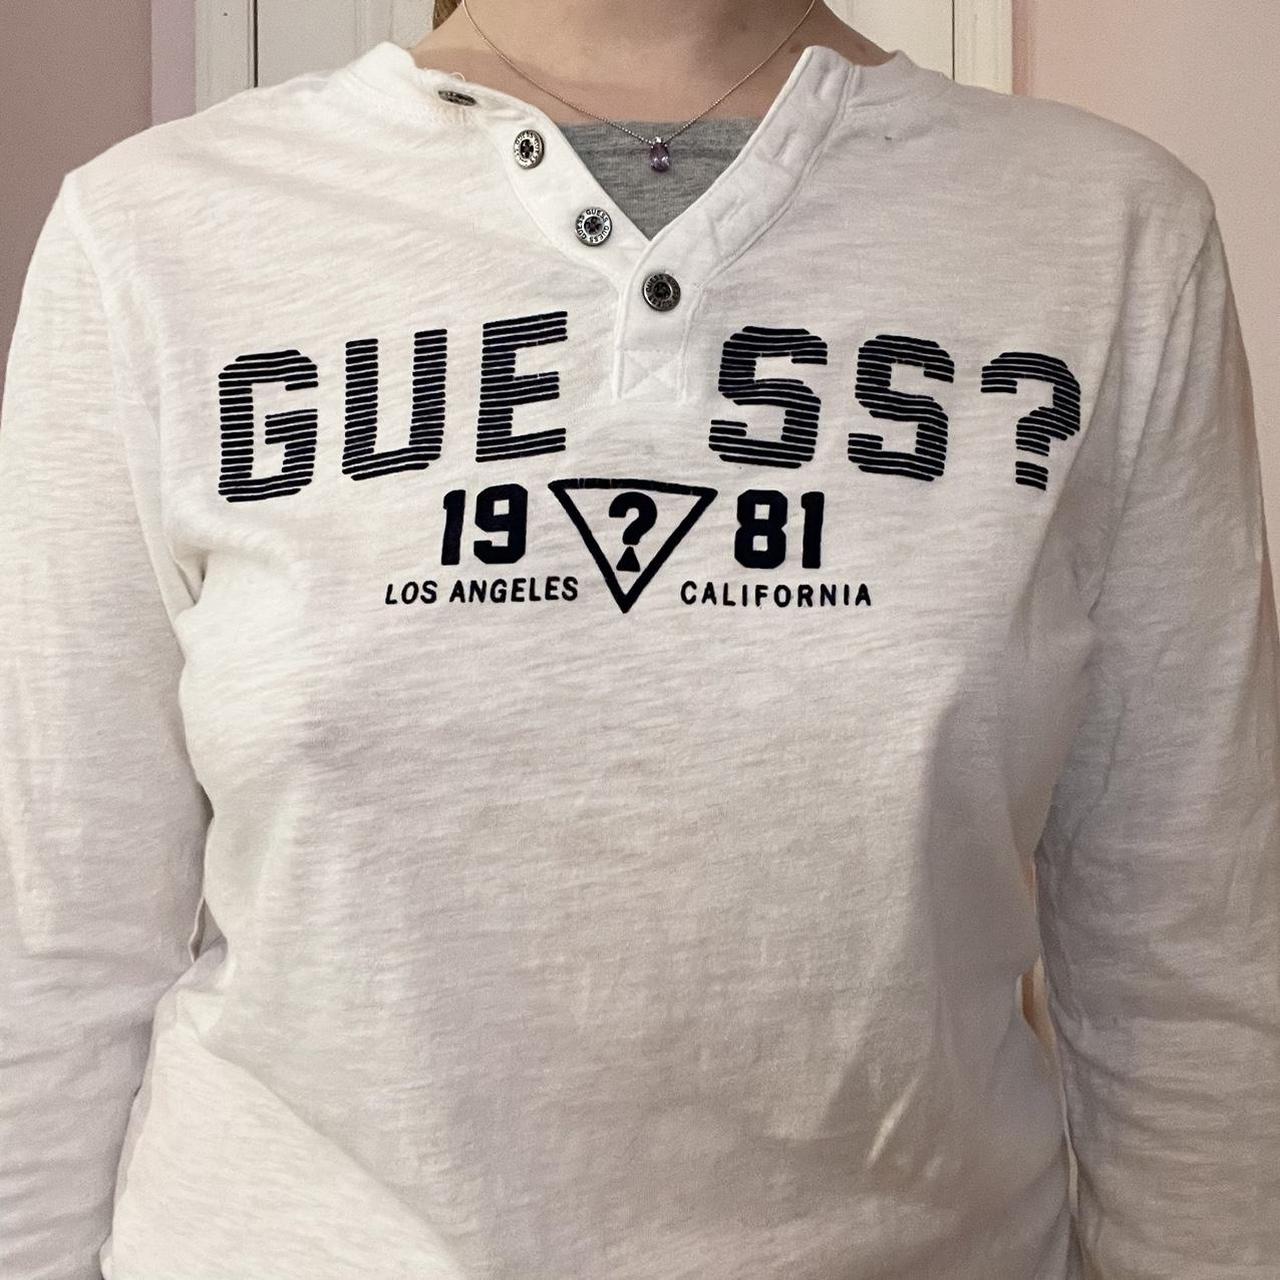 Guess White and Navy Shirt (2)